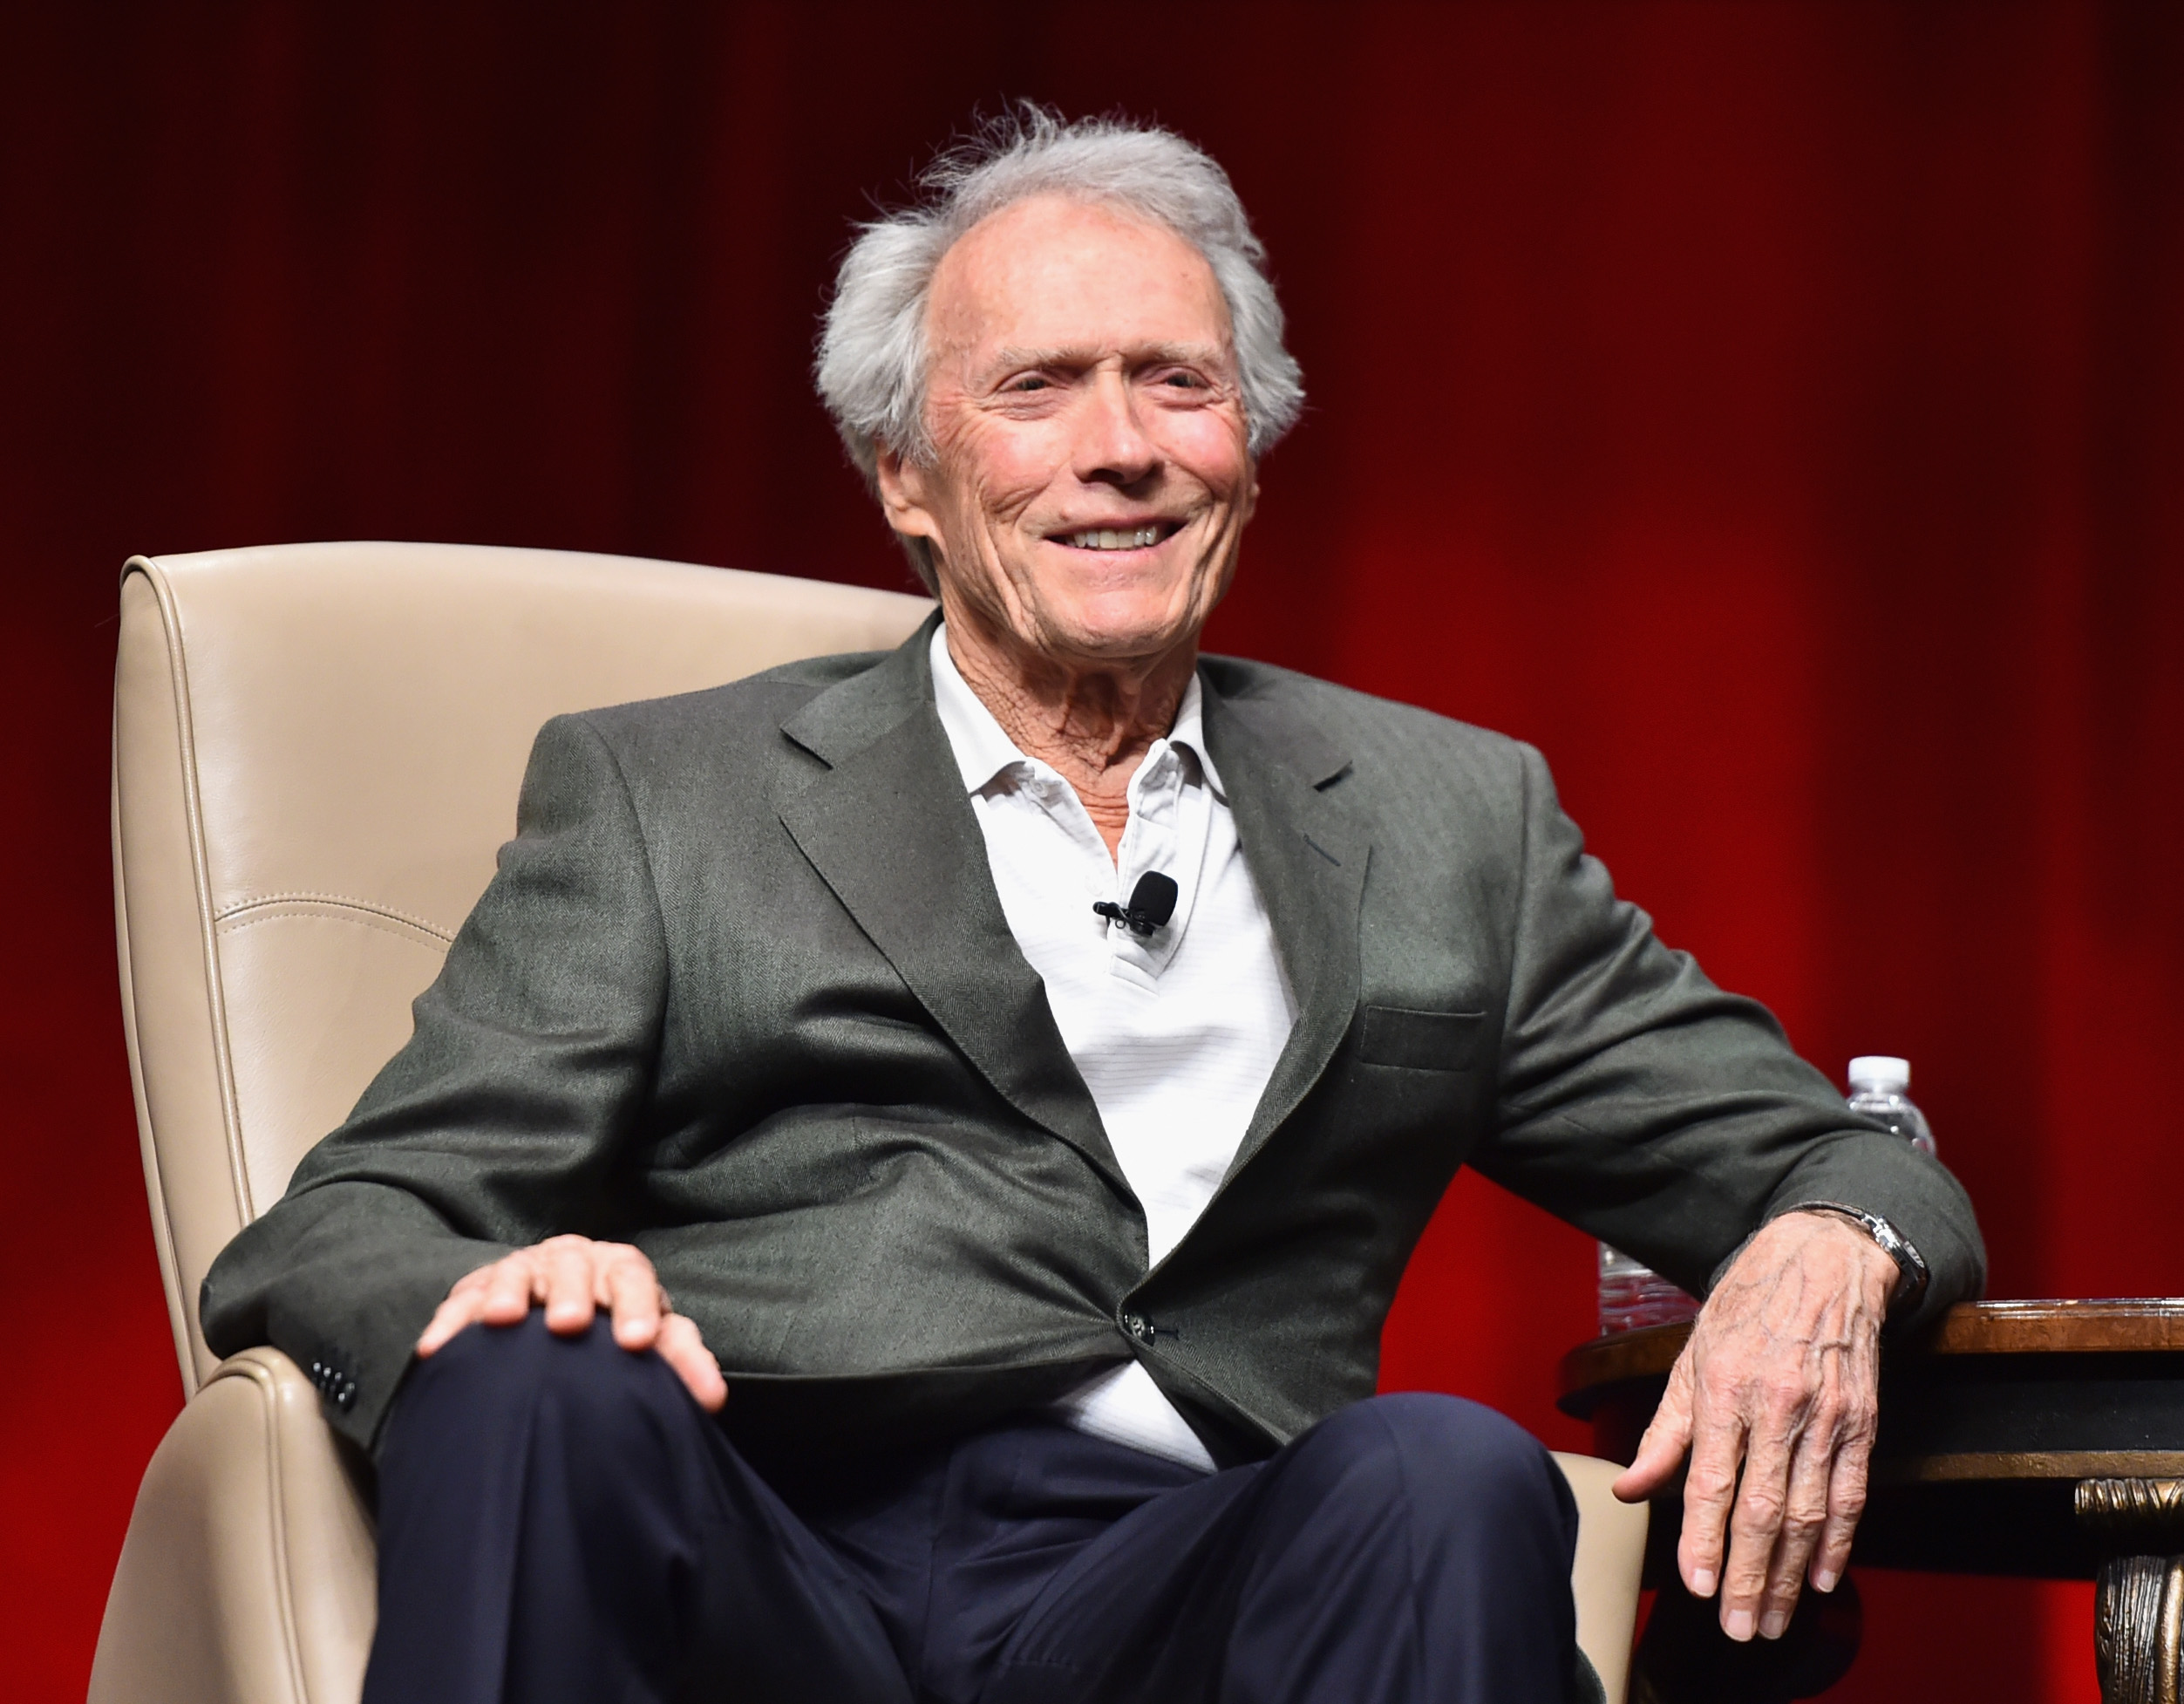 Clint Eastwood speaks during CinemaCon in Las Vegas, Nevada on April 22, 2015 | Source: Getty Images